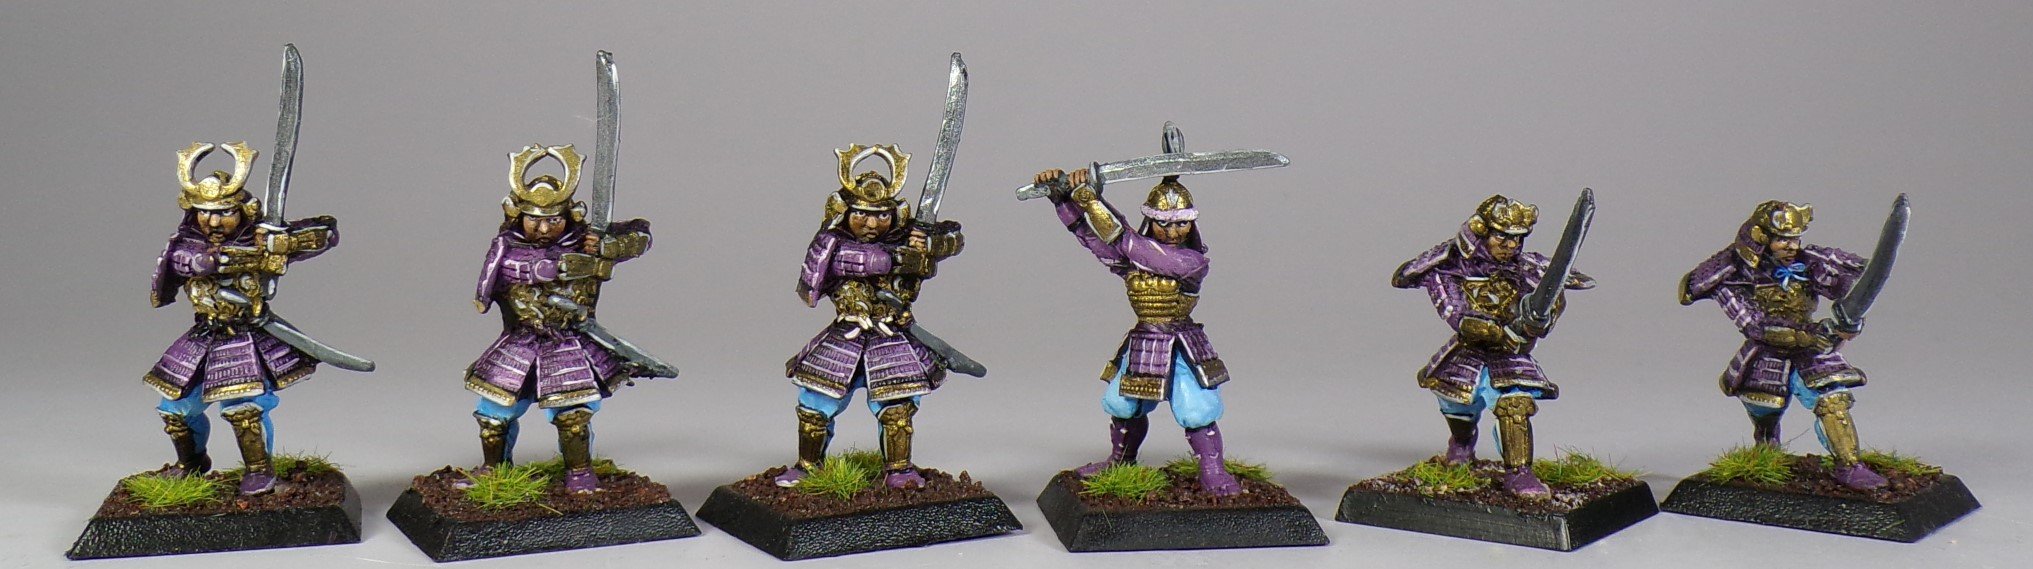 L5R Legend of the Five Rings Miniature Painting Service Paintedfigs.jpg